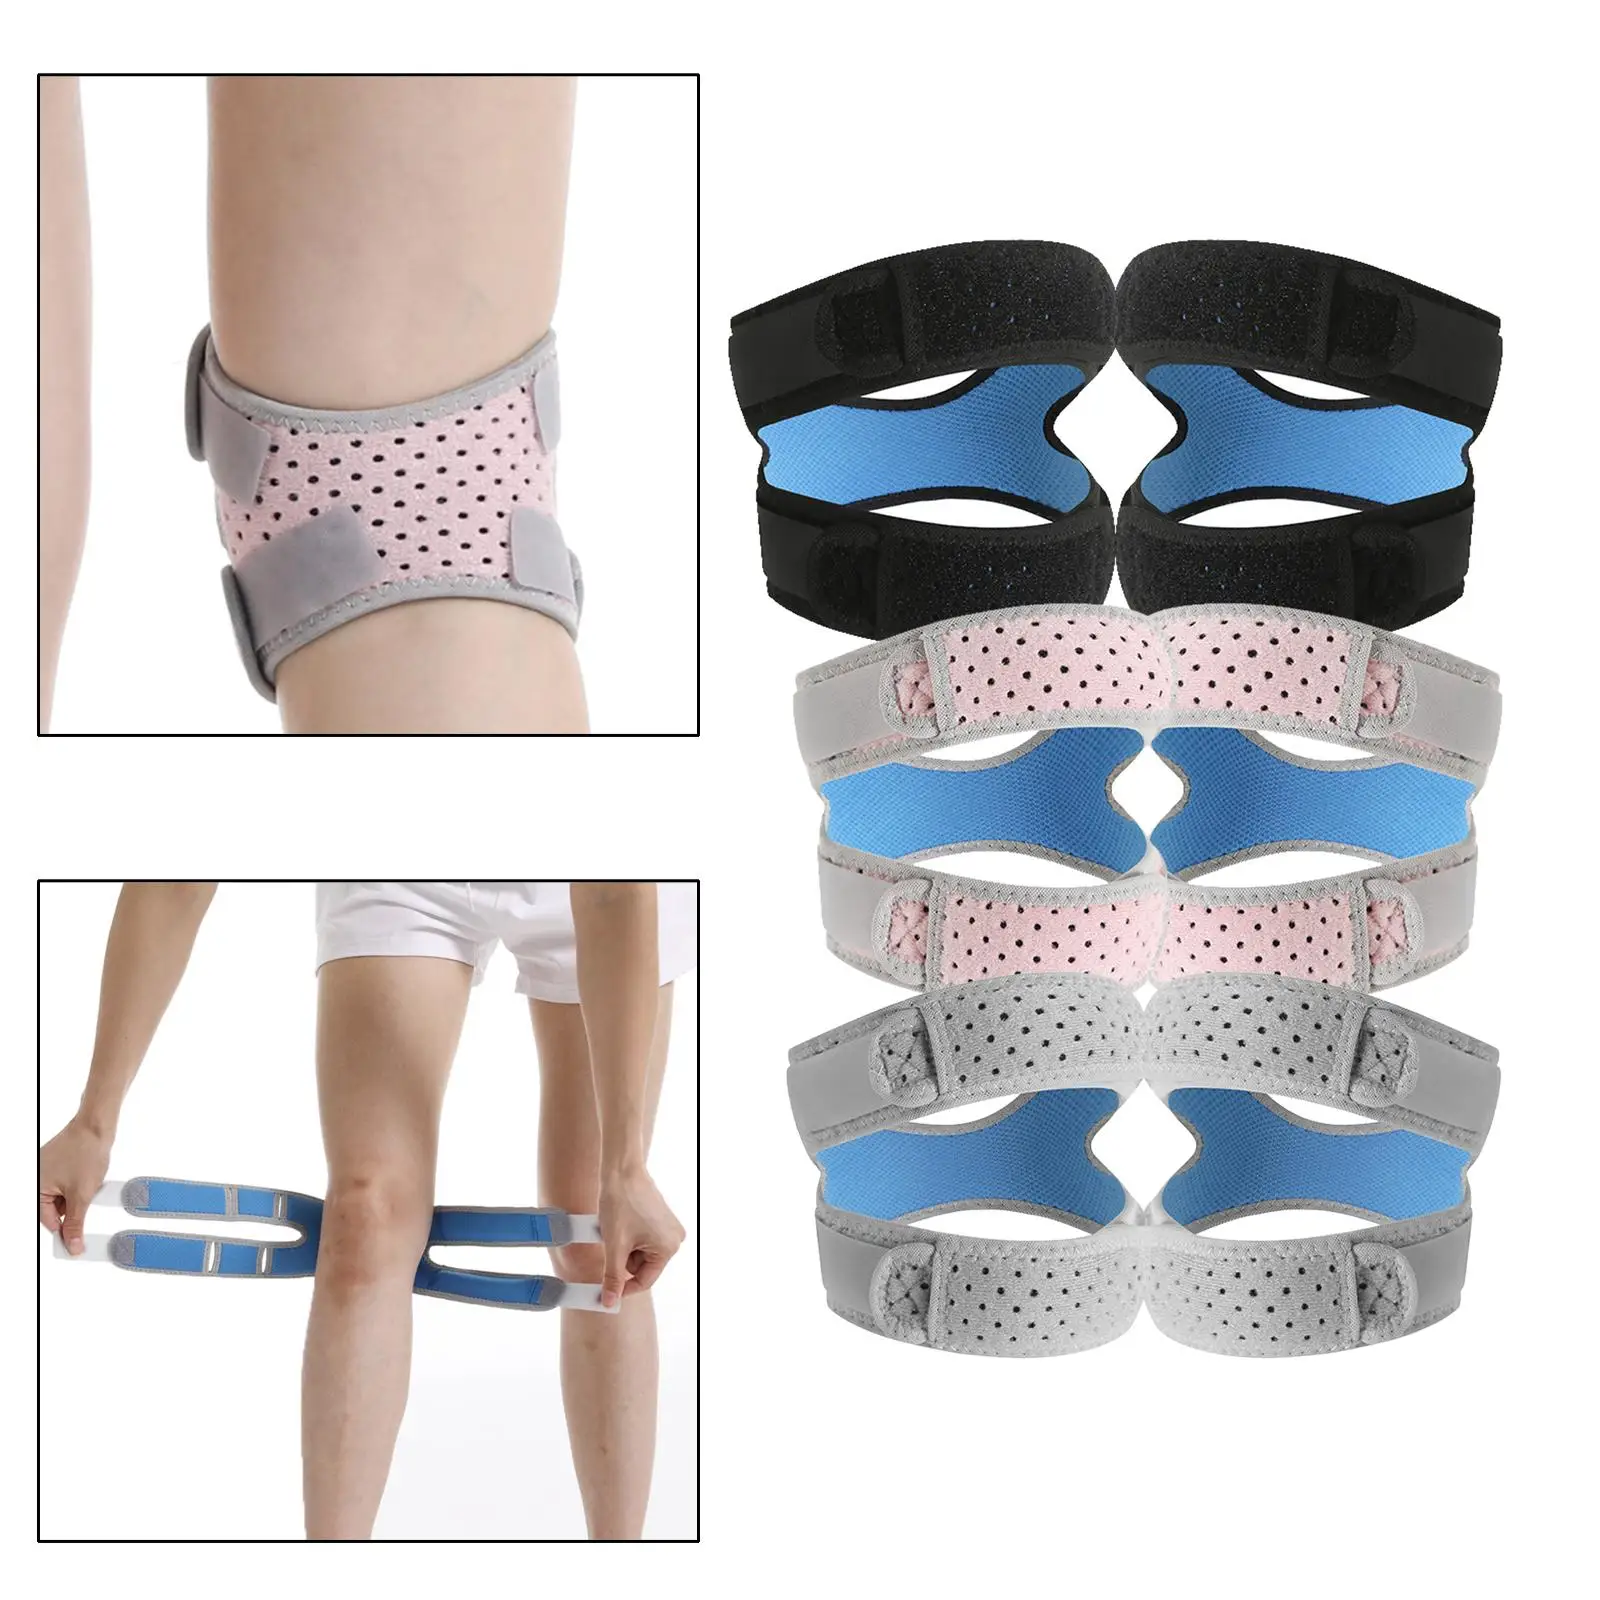 Knee Pads Support Breathable Bandage Men Women Adjustable Band Knee Brace for Jogging Fitness Cycling Tennis Climbing Mountain